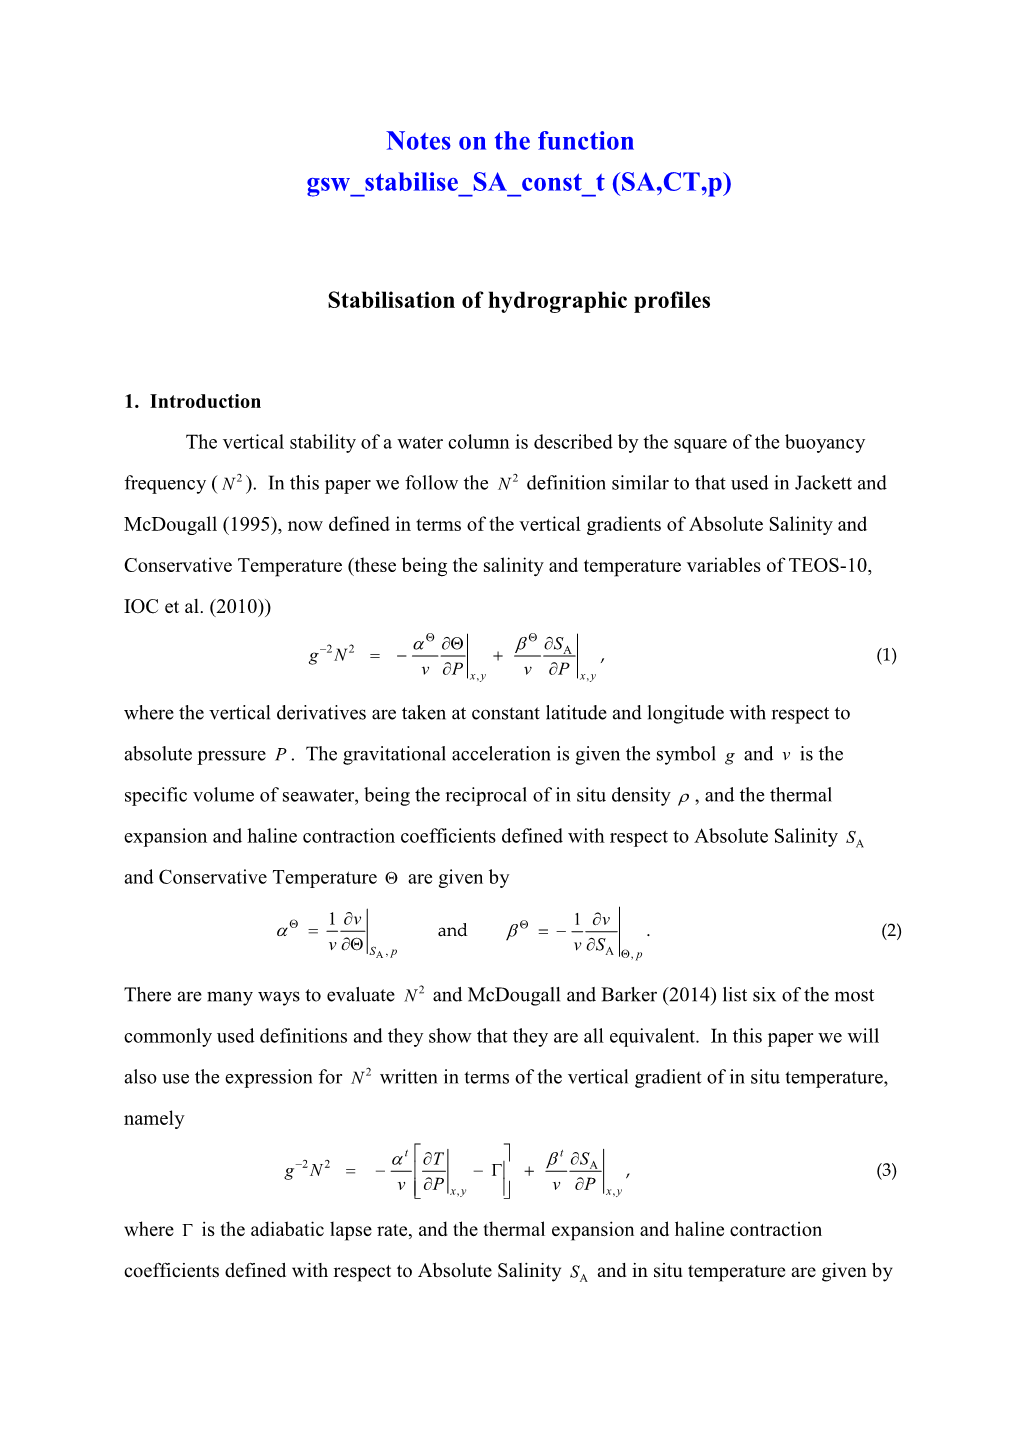 Notes on the Function Gsw Stabilise SA Const T (SA,CT,P)